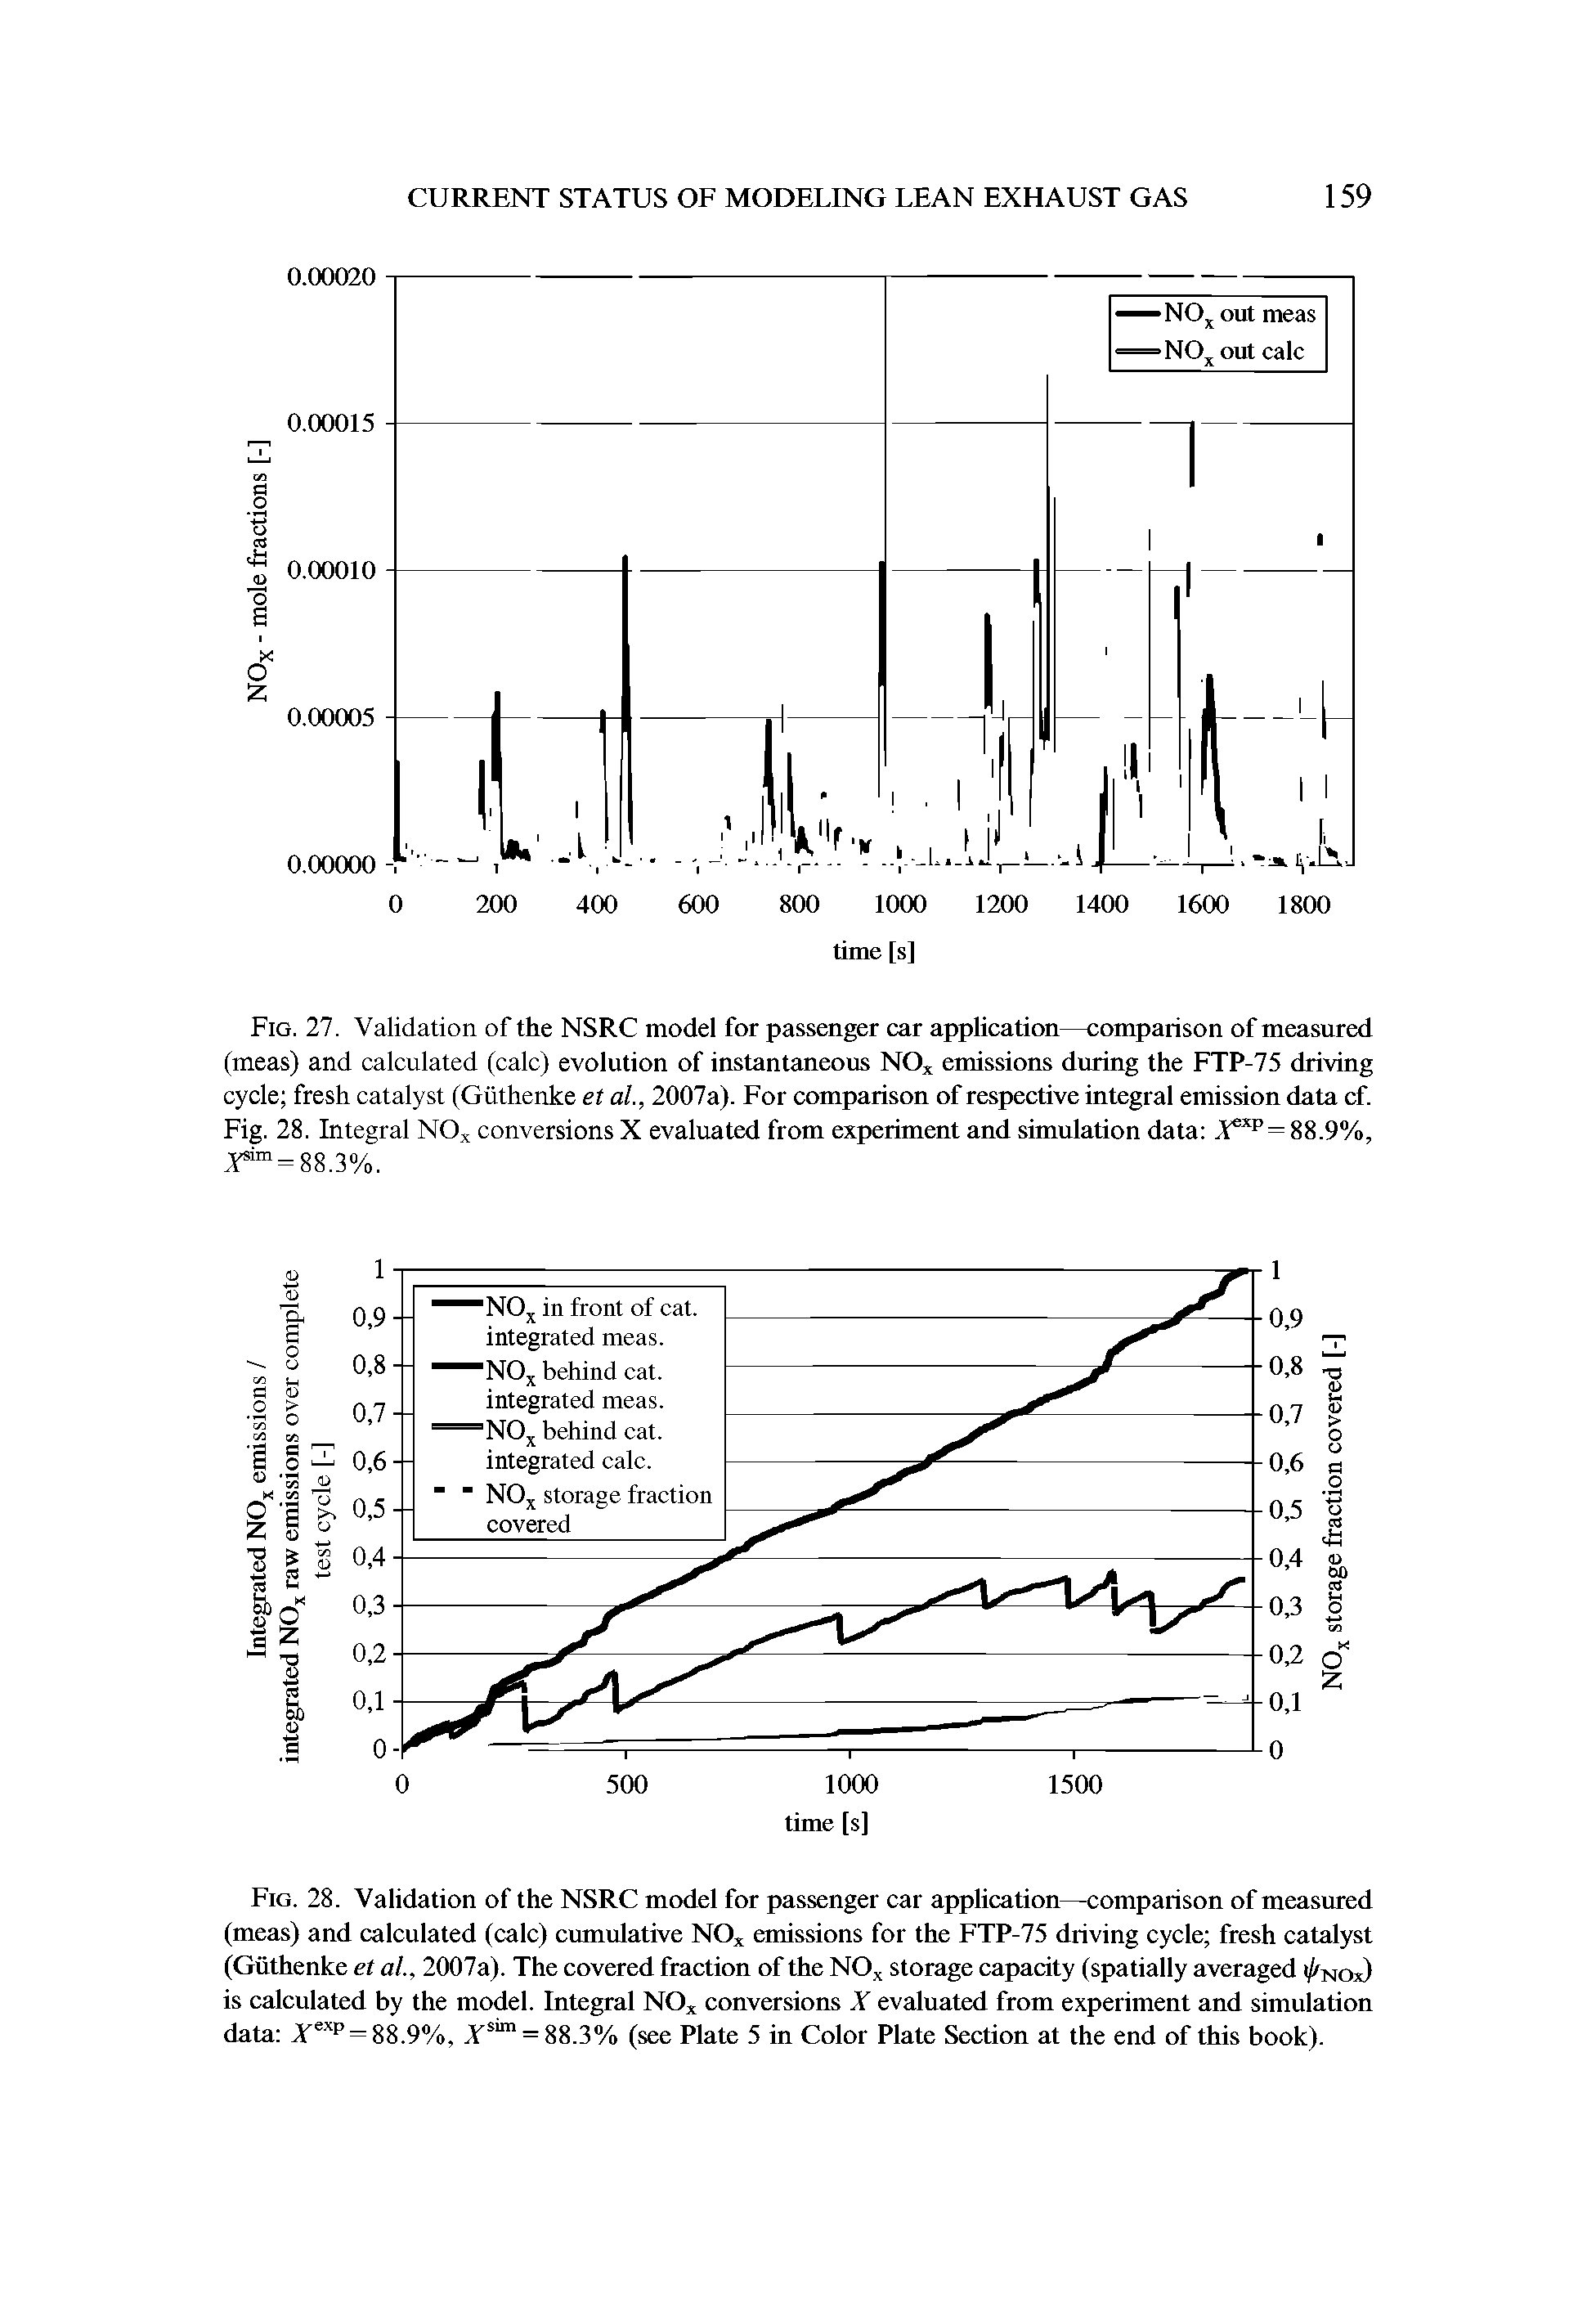 Fig. 28. Validation of the NSRC model for passenger car application—comparison of measured (meas) and calculated (calc) cumulative NOx emissions for the FTP-75 driving cycle fresh catalyst (Giithenke et al., 2007a). The covered fraction of the NOx storage capacity (spatially averaged i//N( )x) is calculated by the model. Integral NOx conversions X evaluated from experiment and simulation data Xexp = 88.9%, Tslm = 88.3% (see Plate 5 in Color Plate Section at the end of this book).